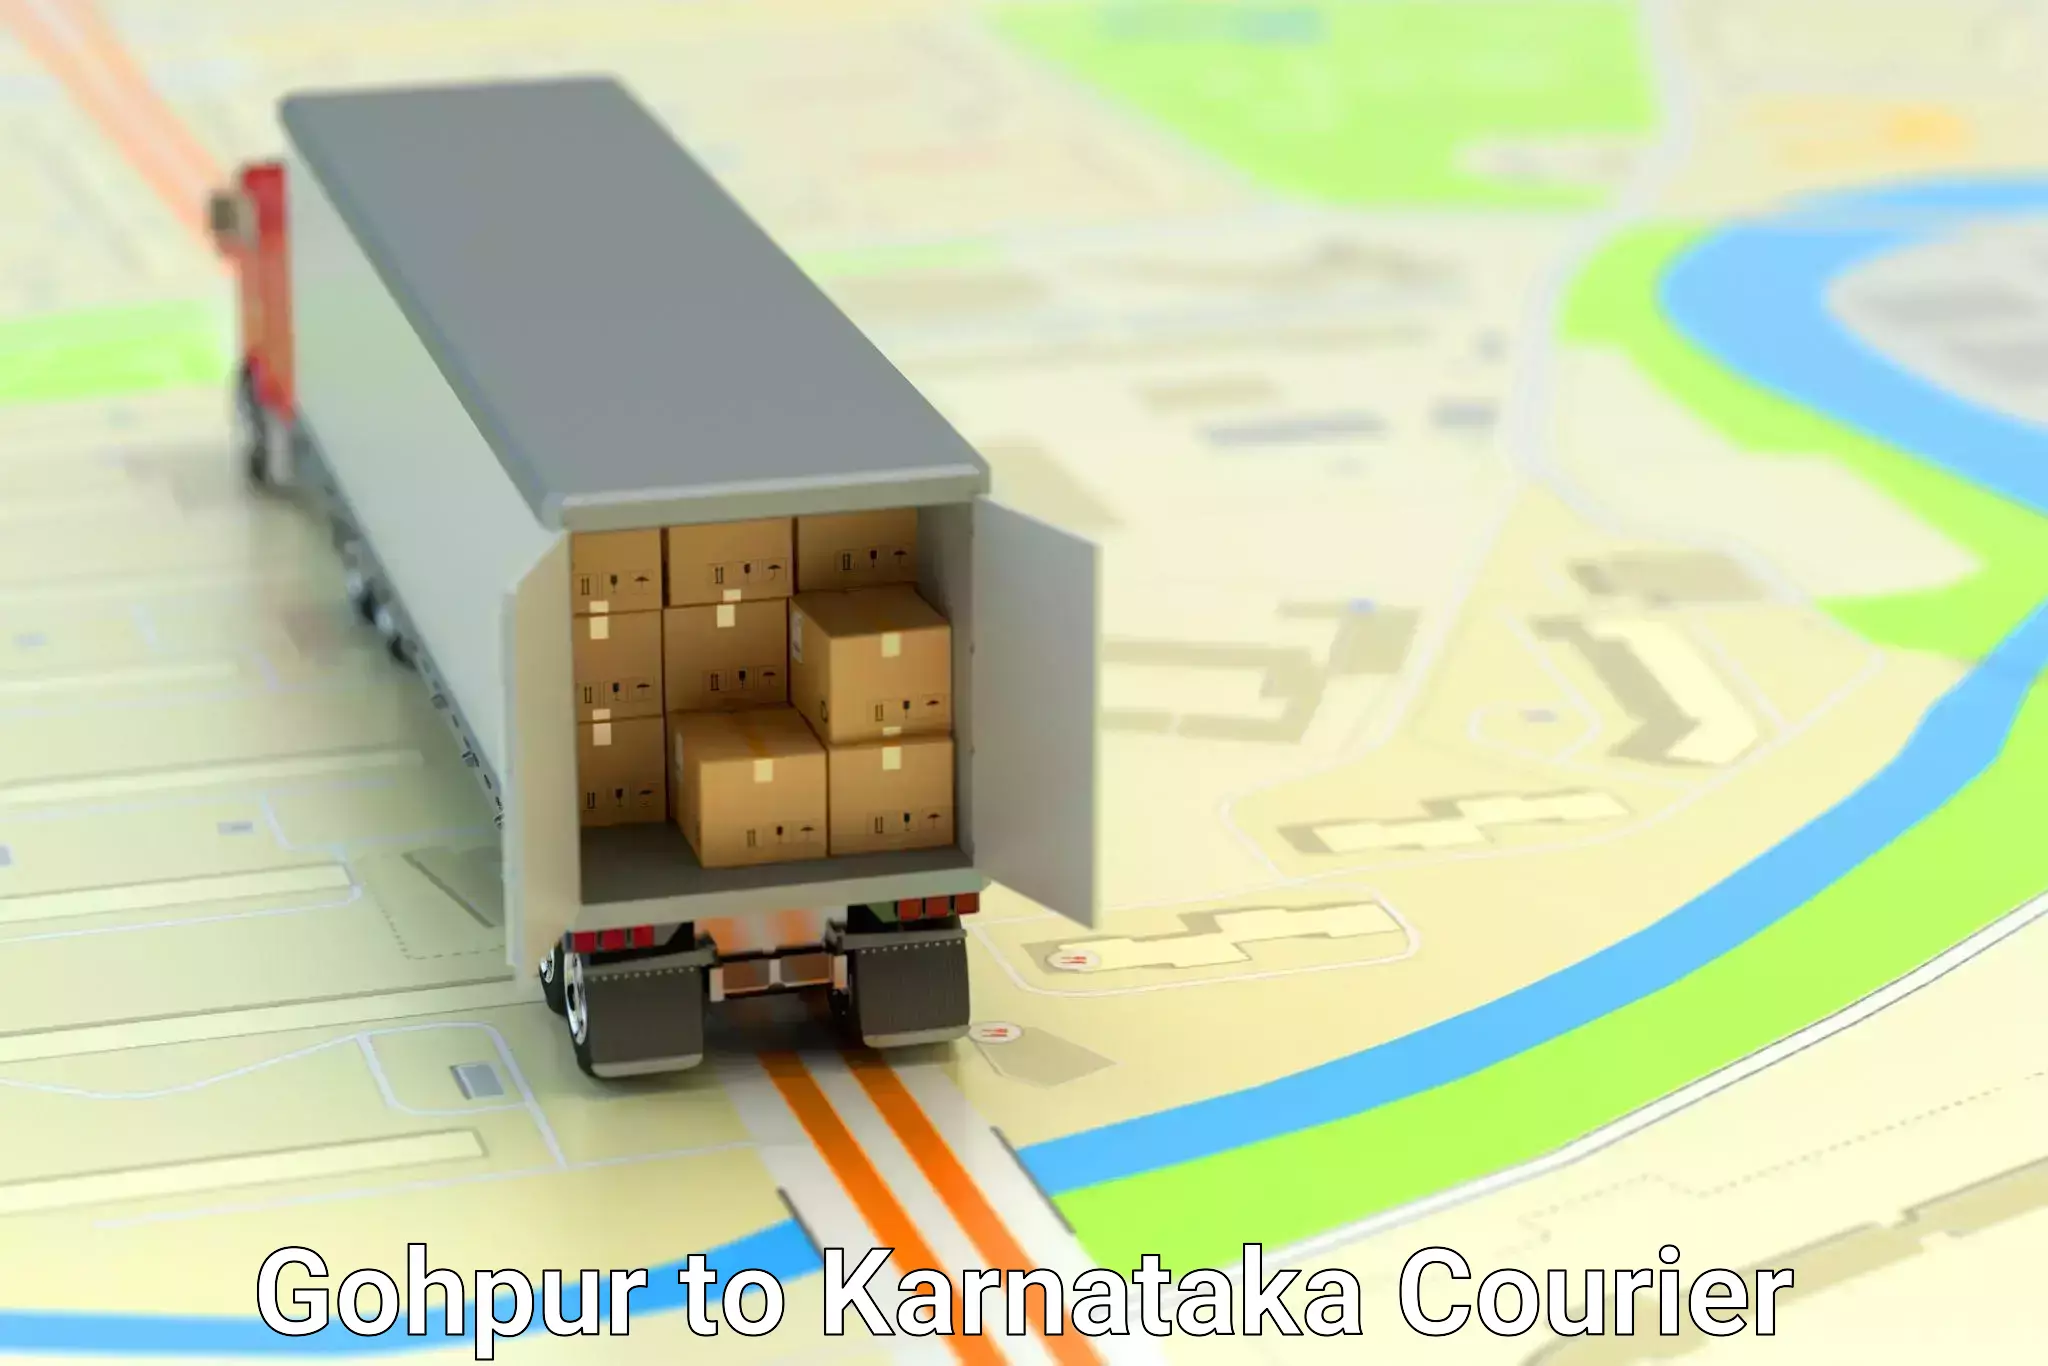 Shipping and handling Gohpur to Manipal